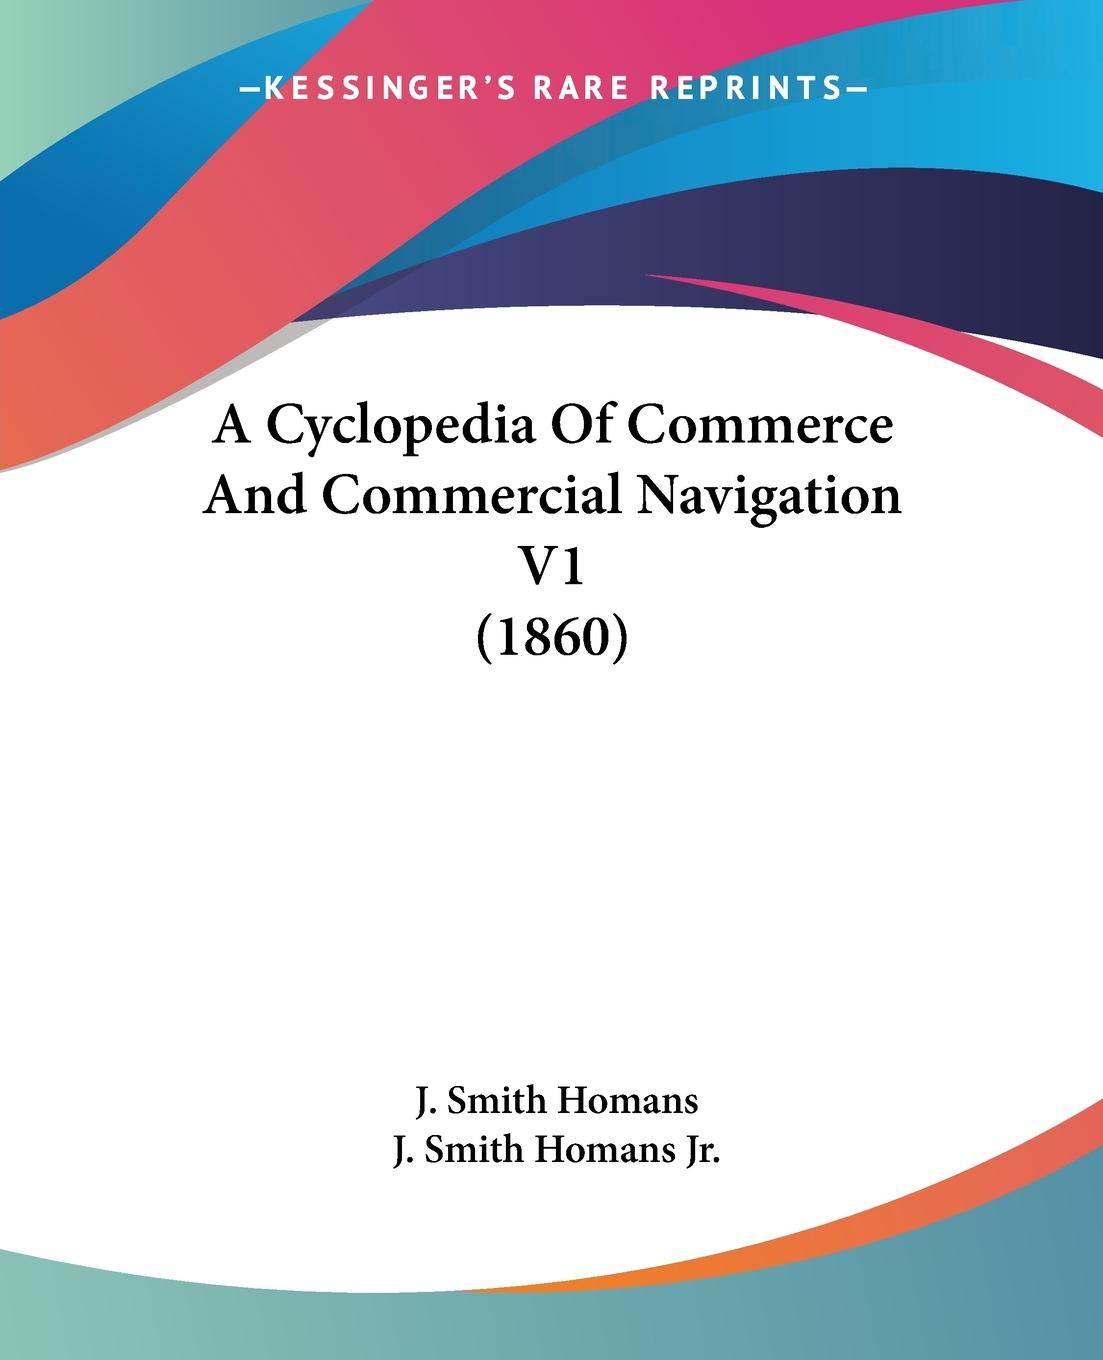 A Cyclopedia Of Commerce And Commercial Navigation V1 (1860)